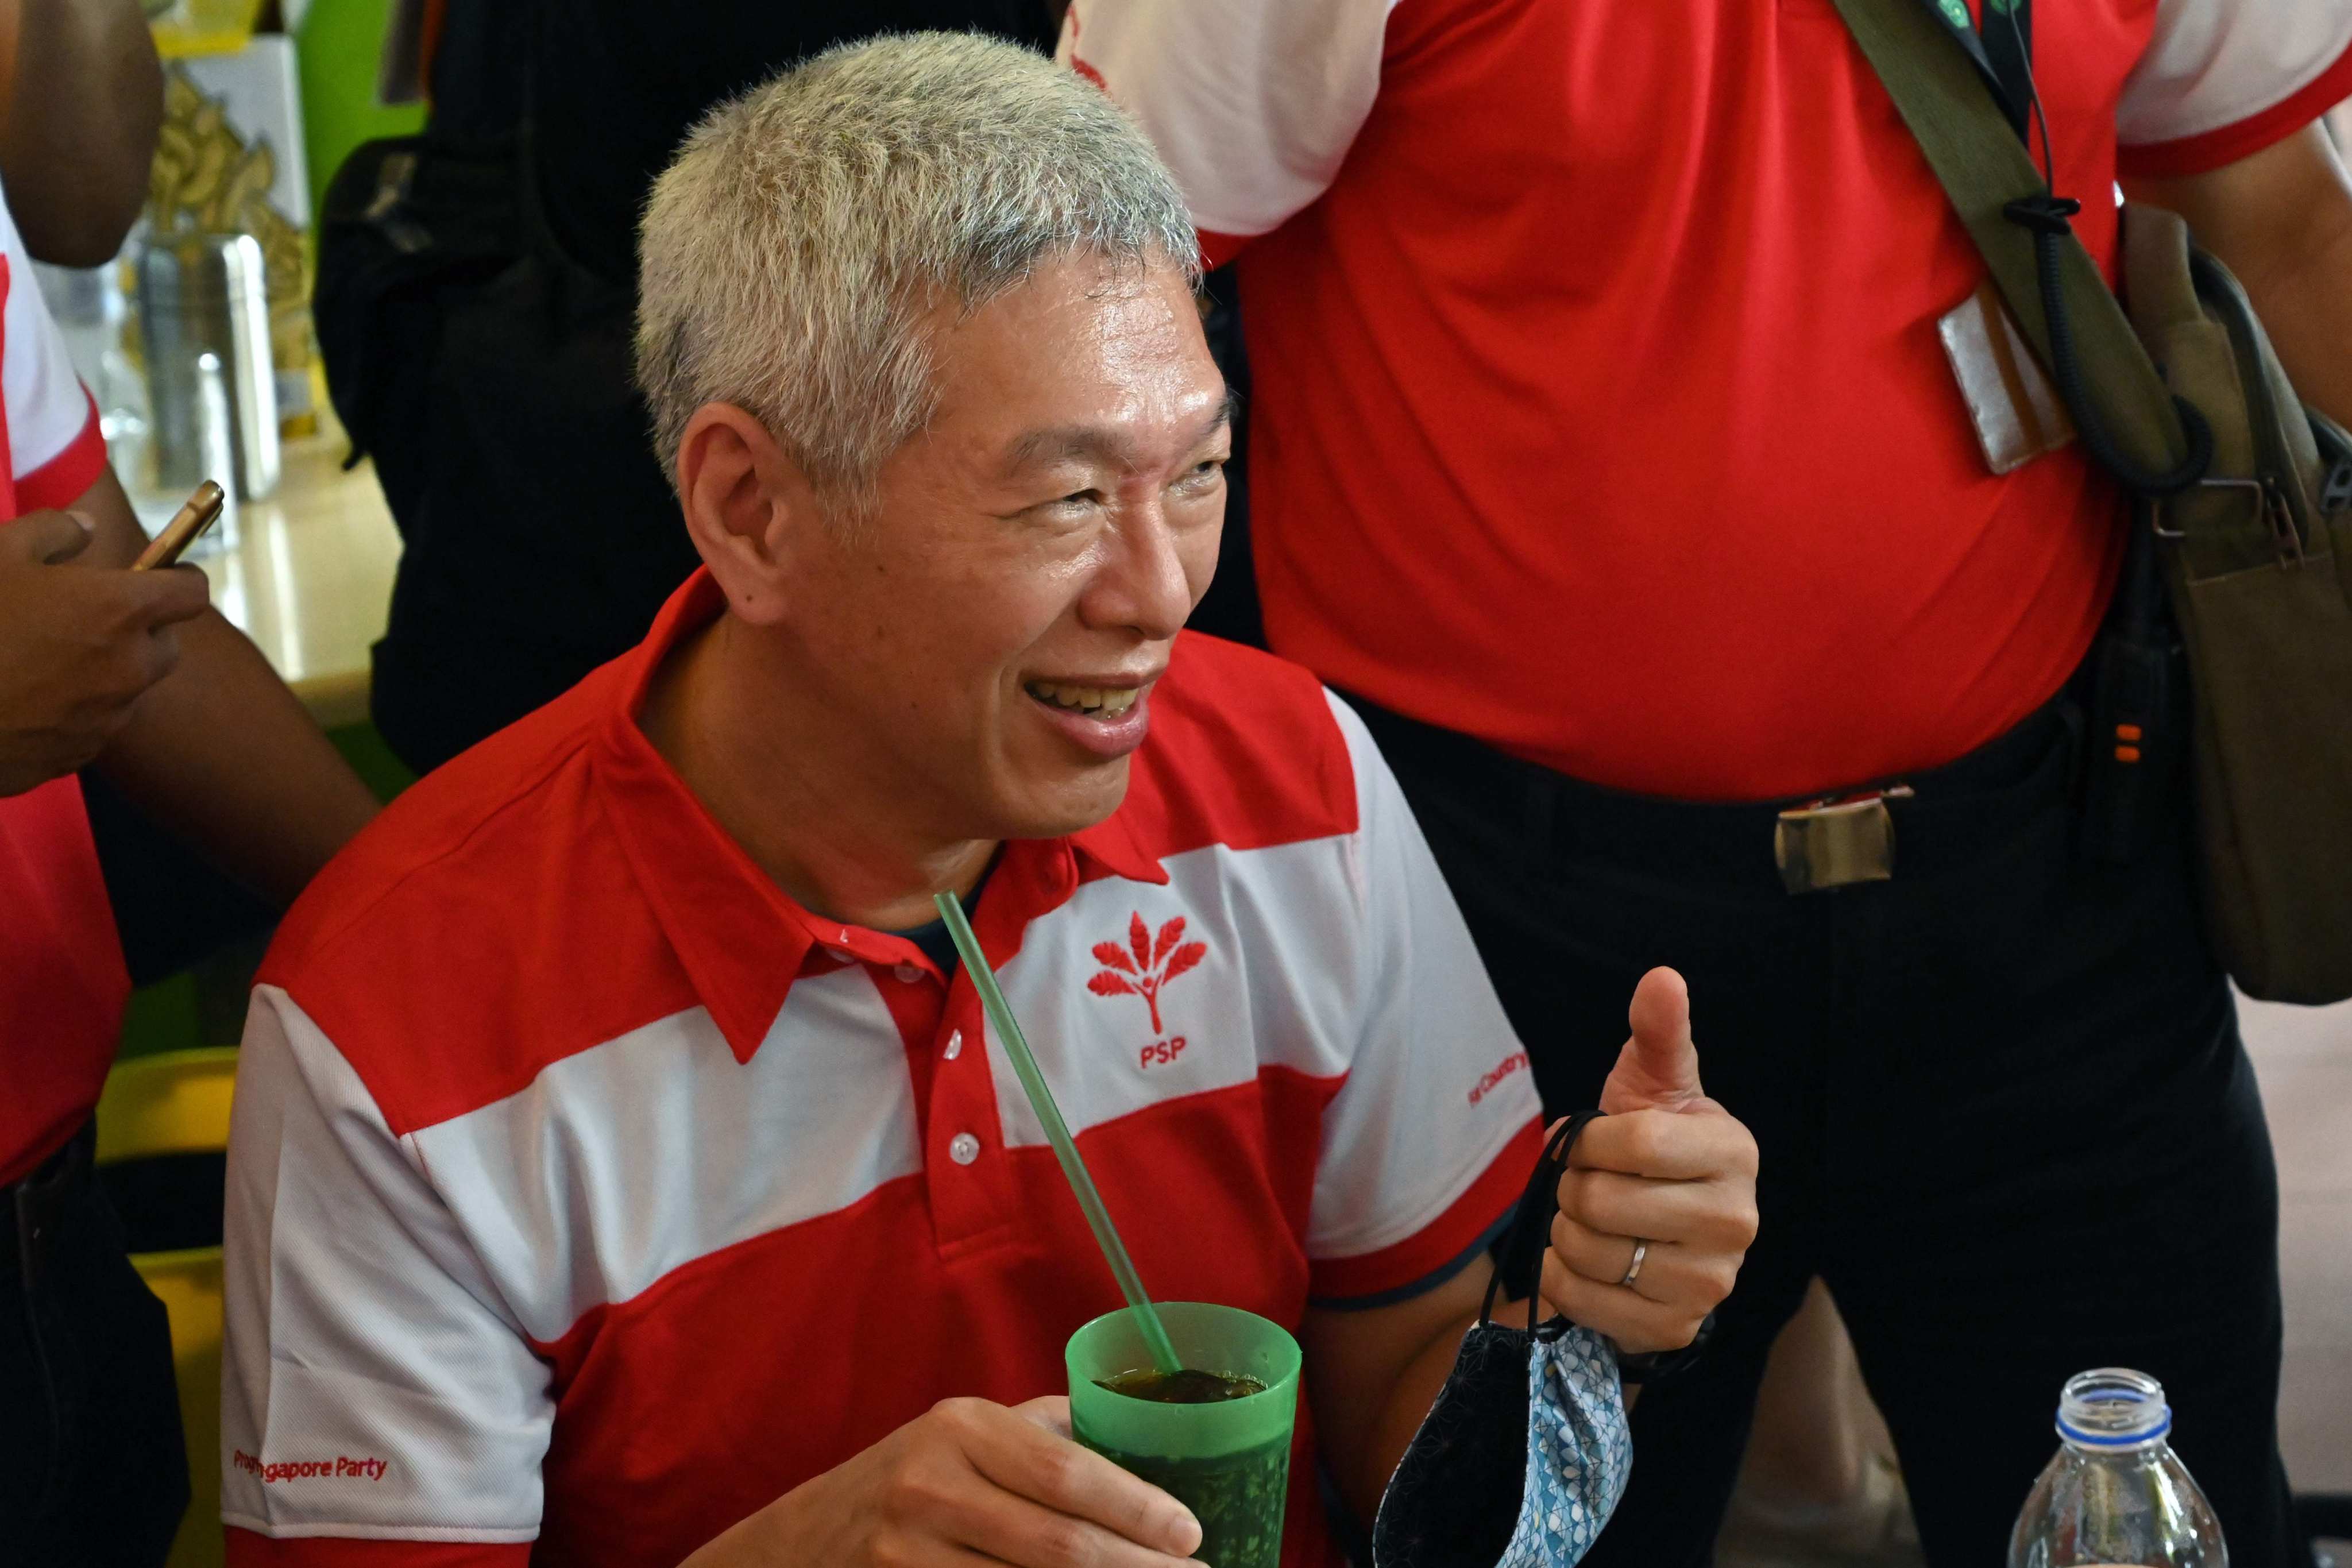 Lee Hsien Yang, the brother of Singapore’s Prime Minister Lee Hsien Loong, is considering running for president. Photo: AFP